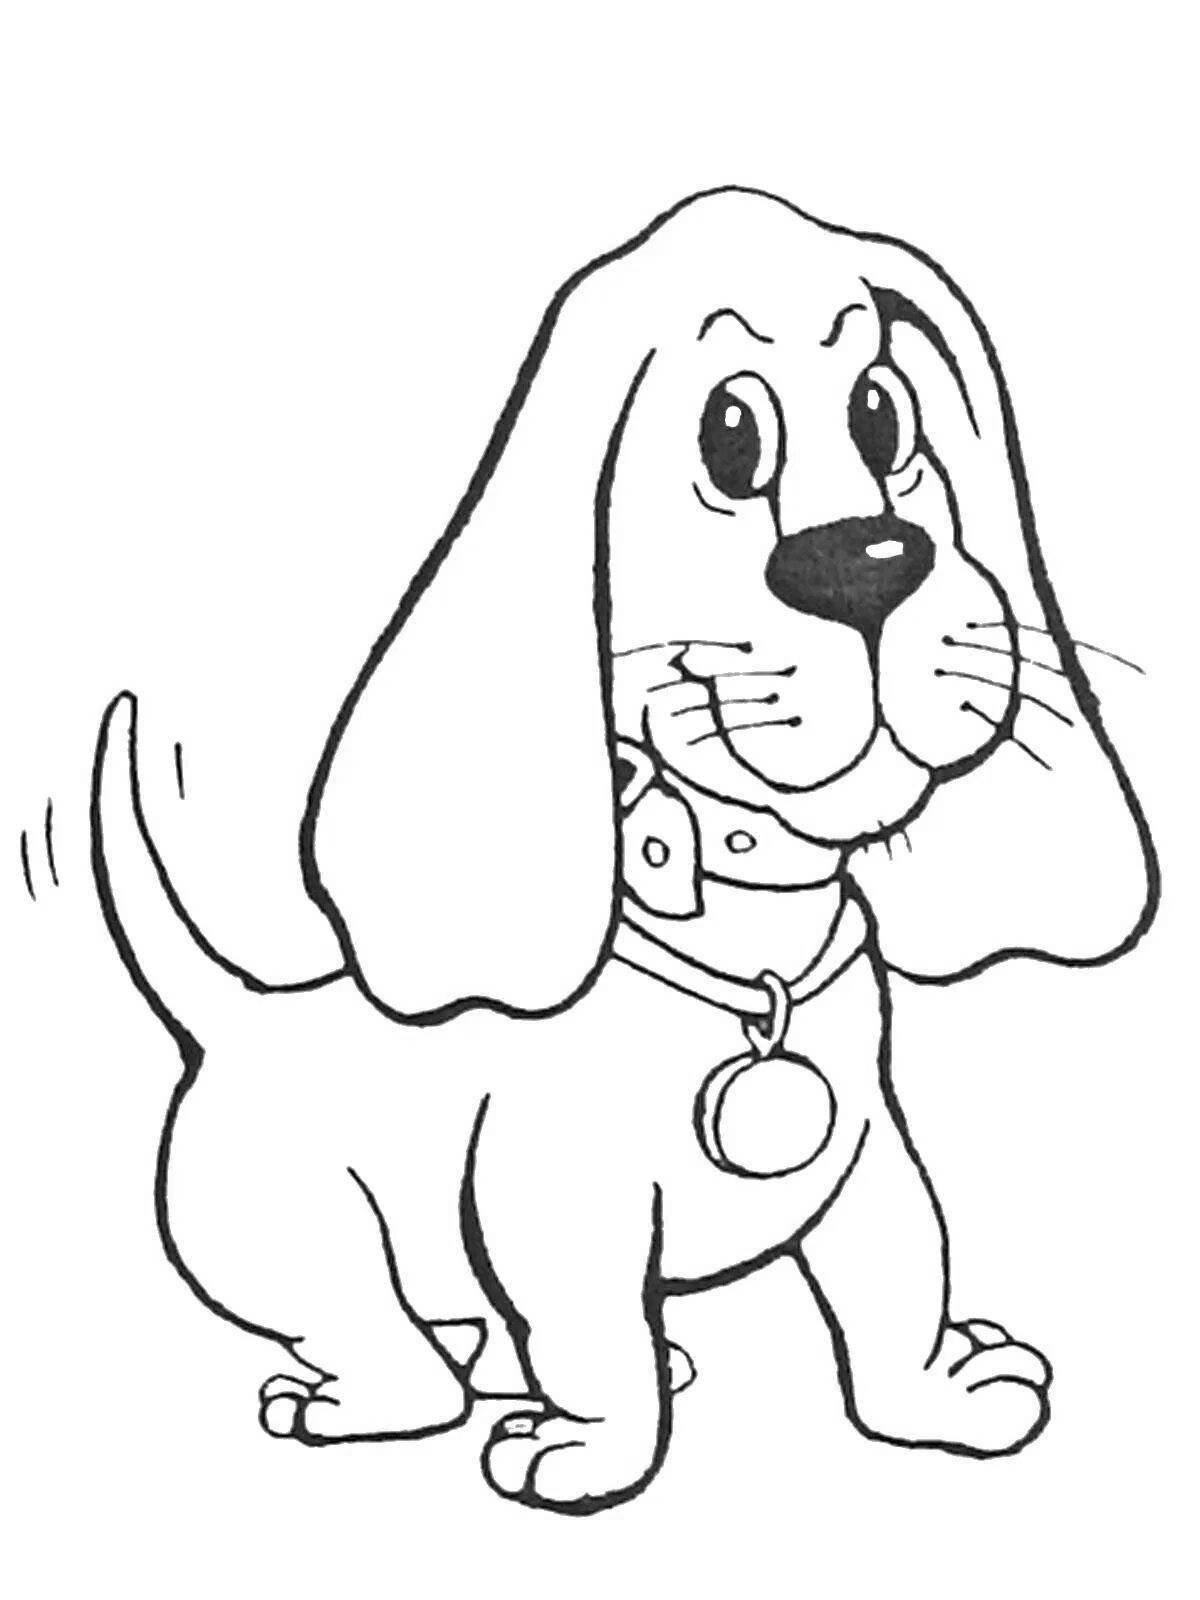 Naughty pet coloring pages for 5-7 year olds